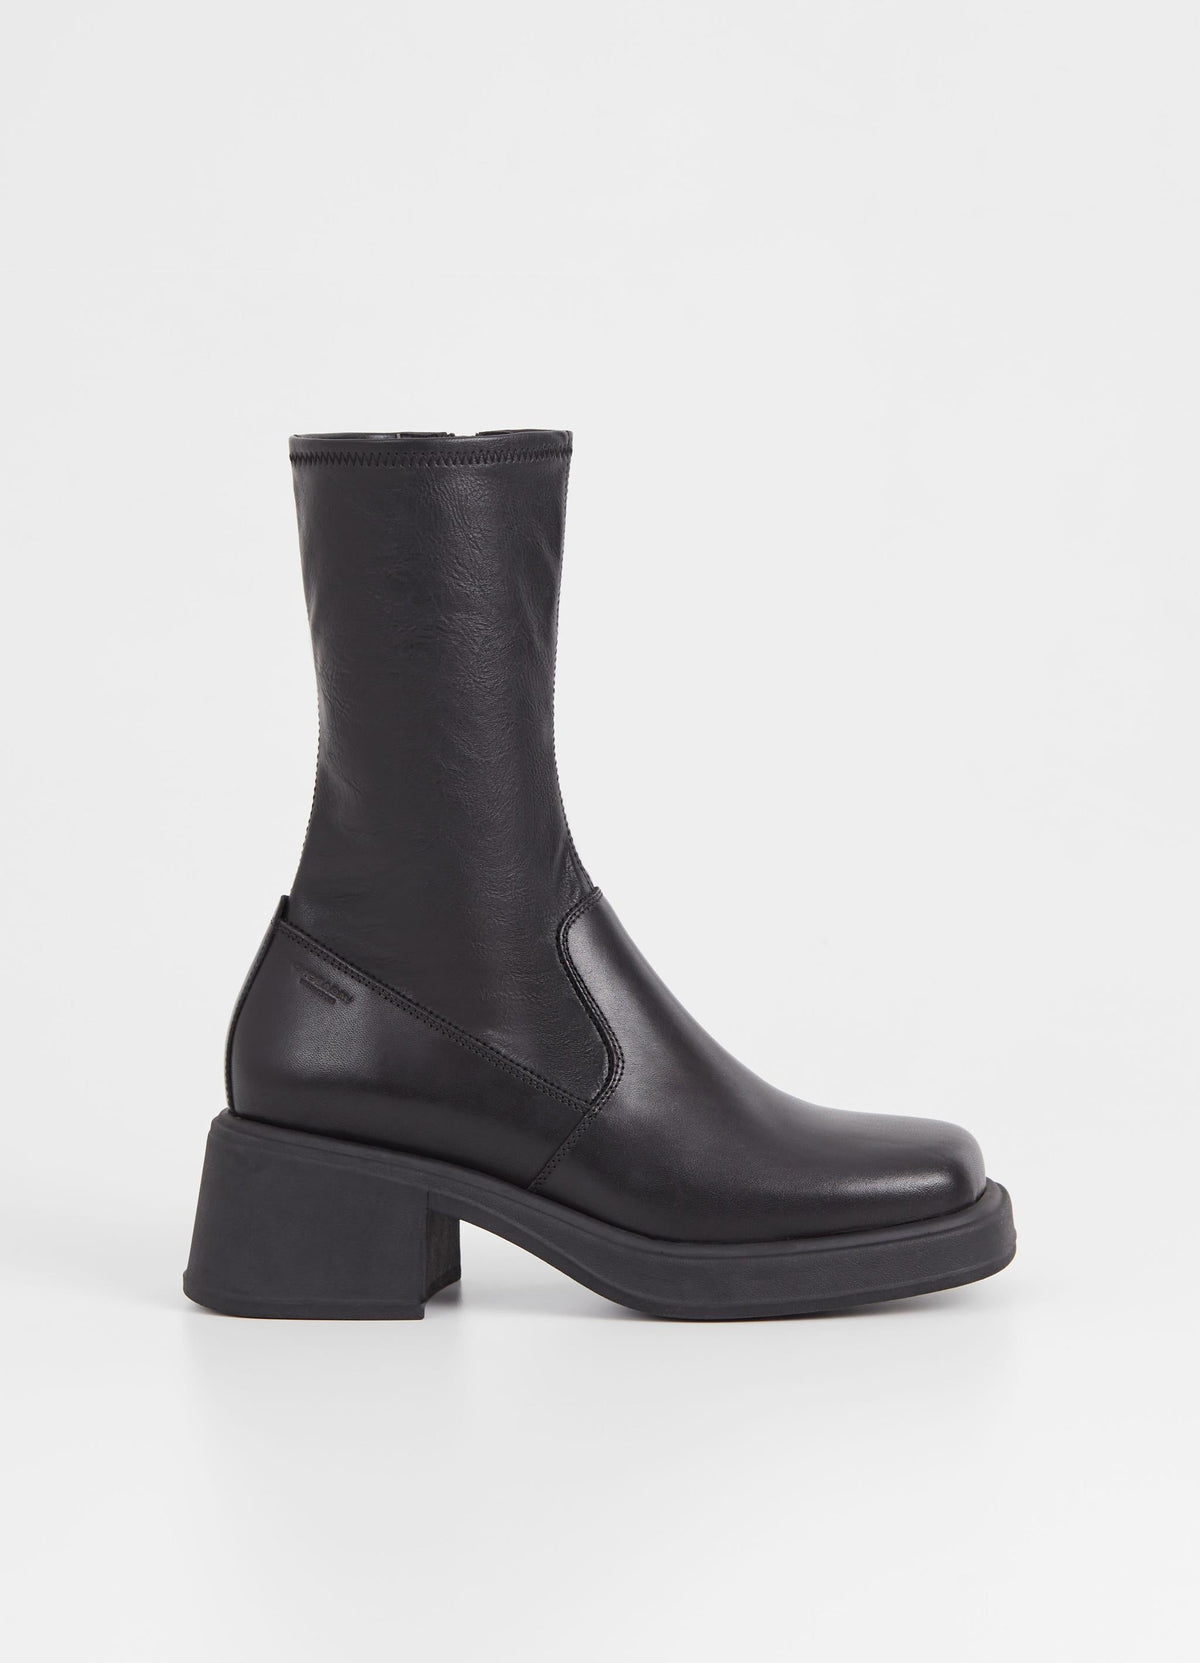 Mid rise leather and synthetic leather boot with chunky moulded sole and heel